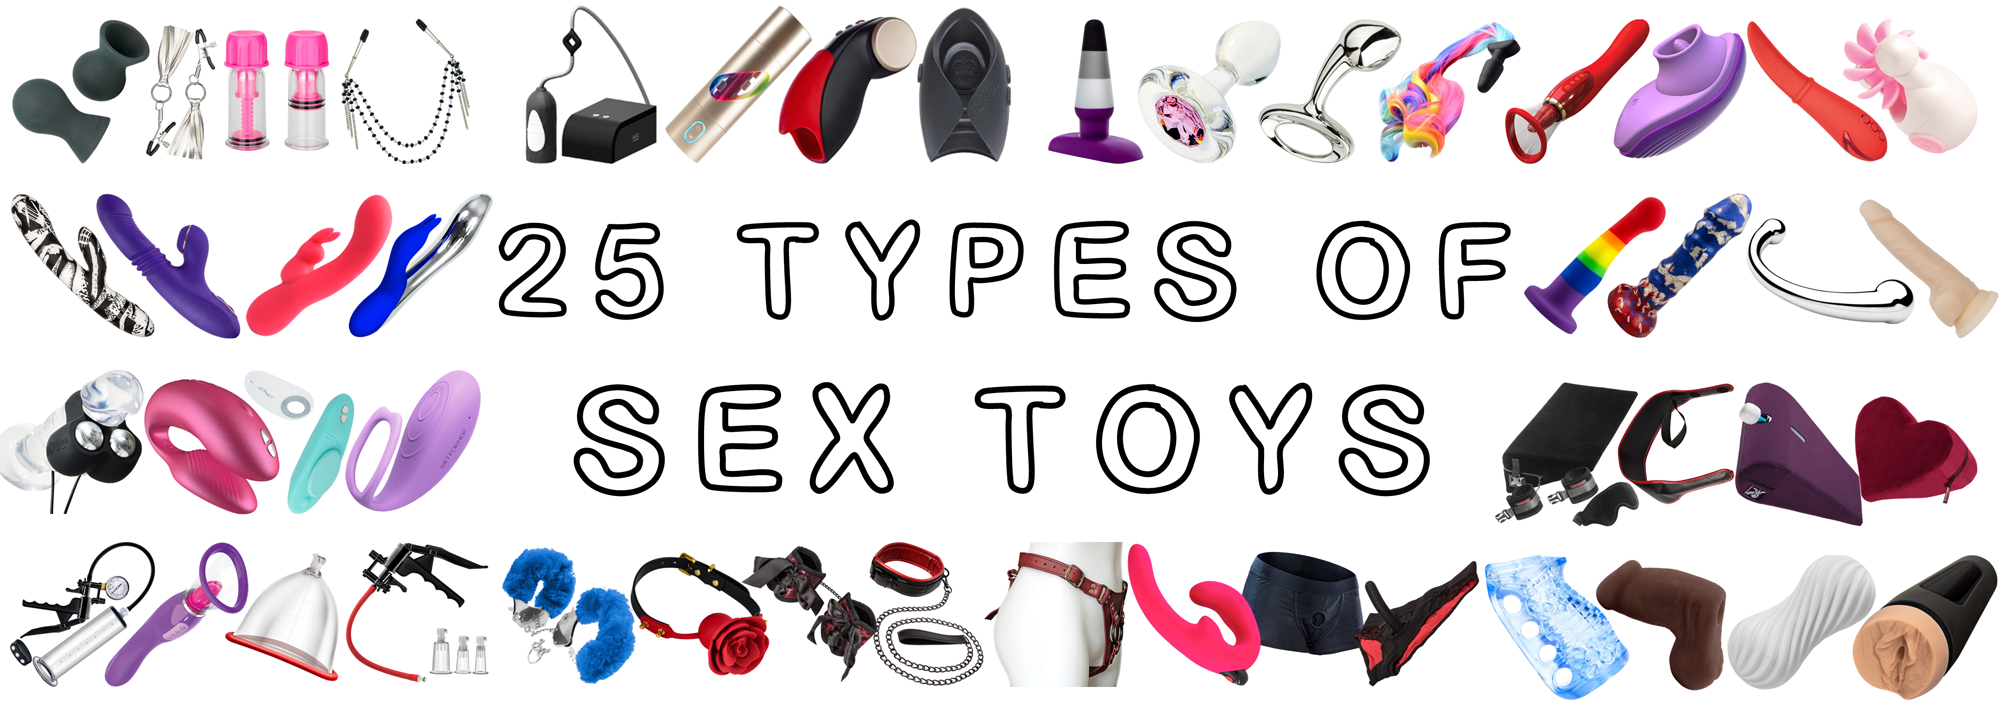 25 Types of Sex Toys A Guide to Help You Know Whats Out There image